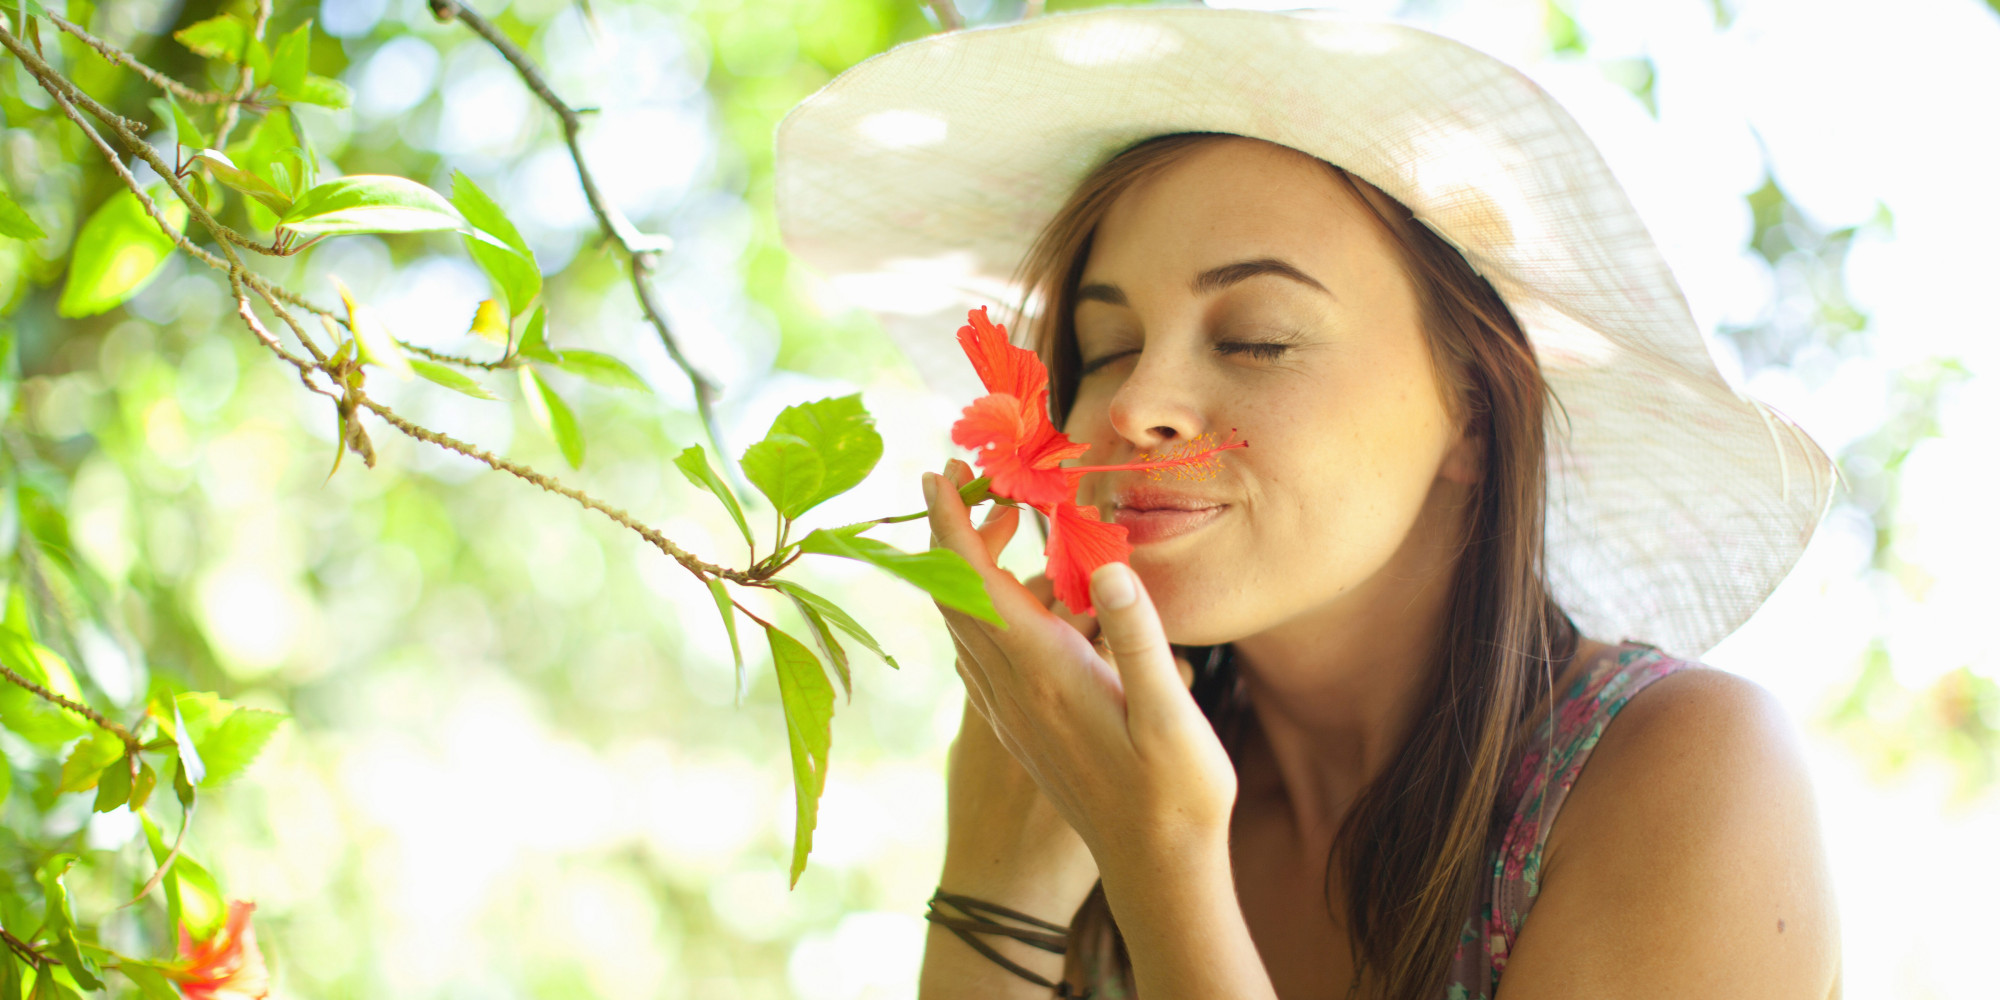 Woman smelling flower in park